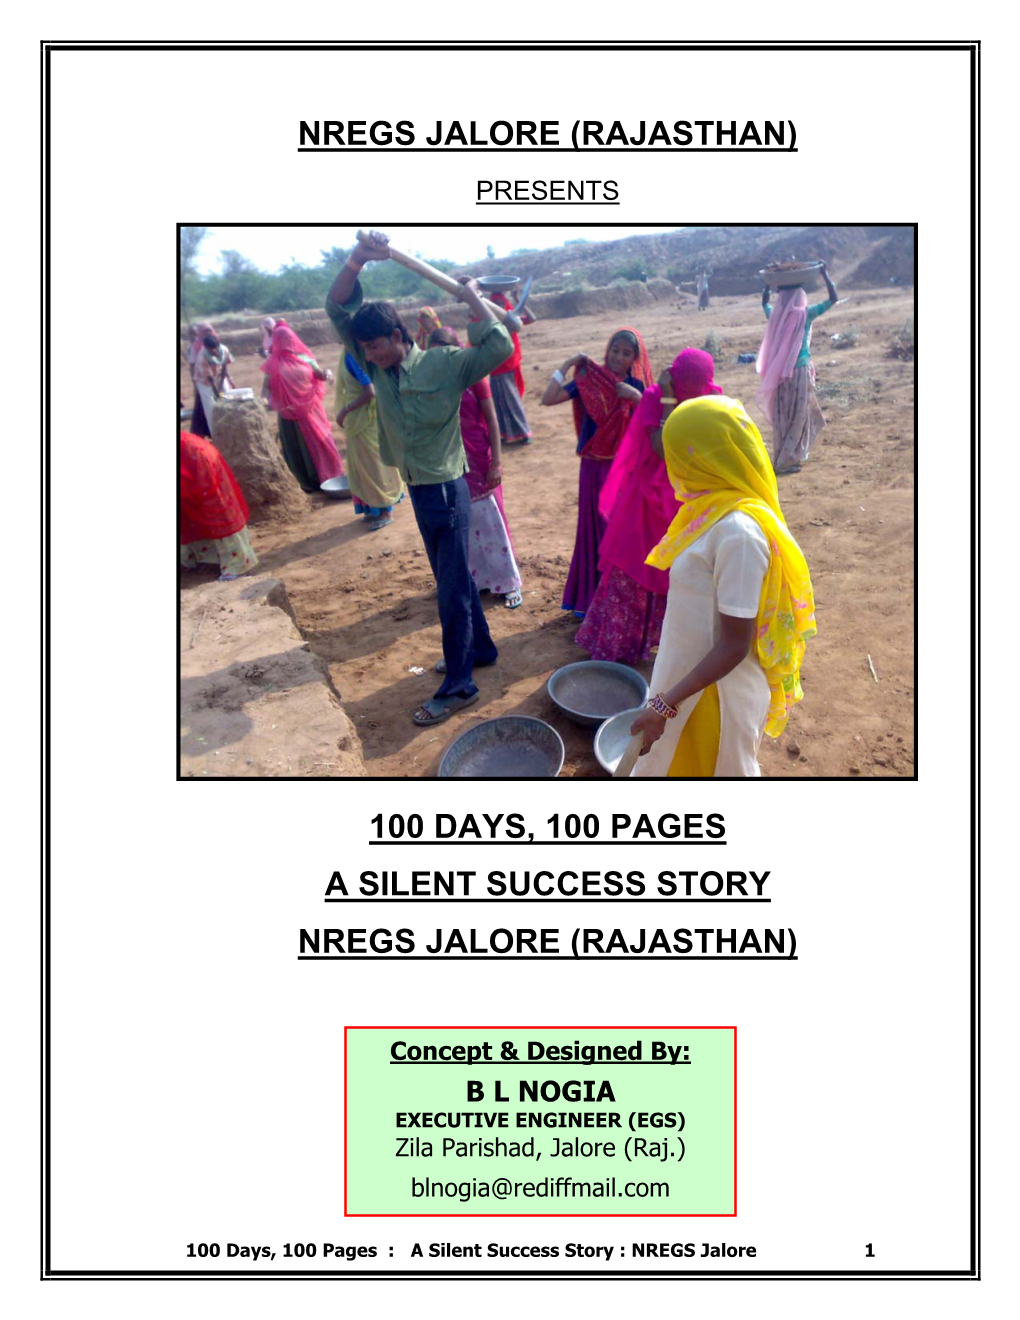 100 Days, 100 Pages a Silent Success Story Nregs Jalore (Rajasthan)